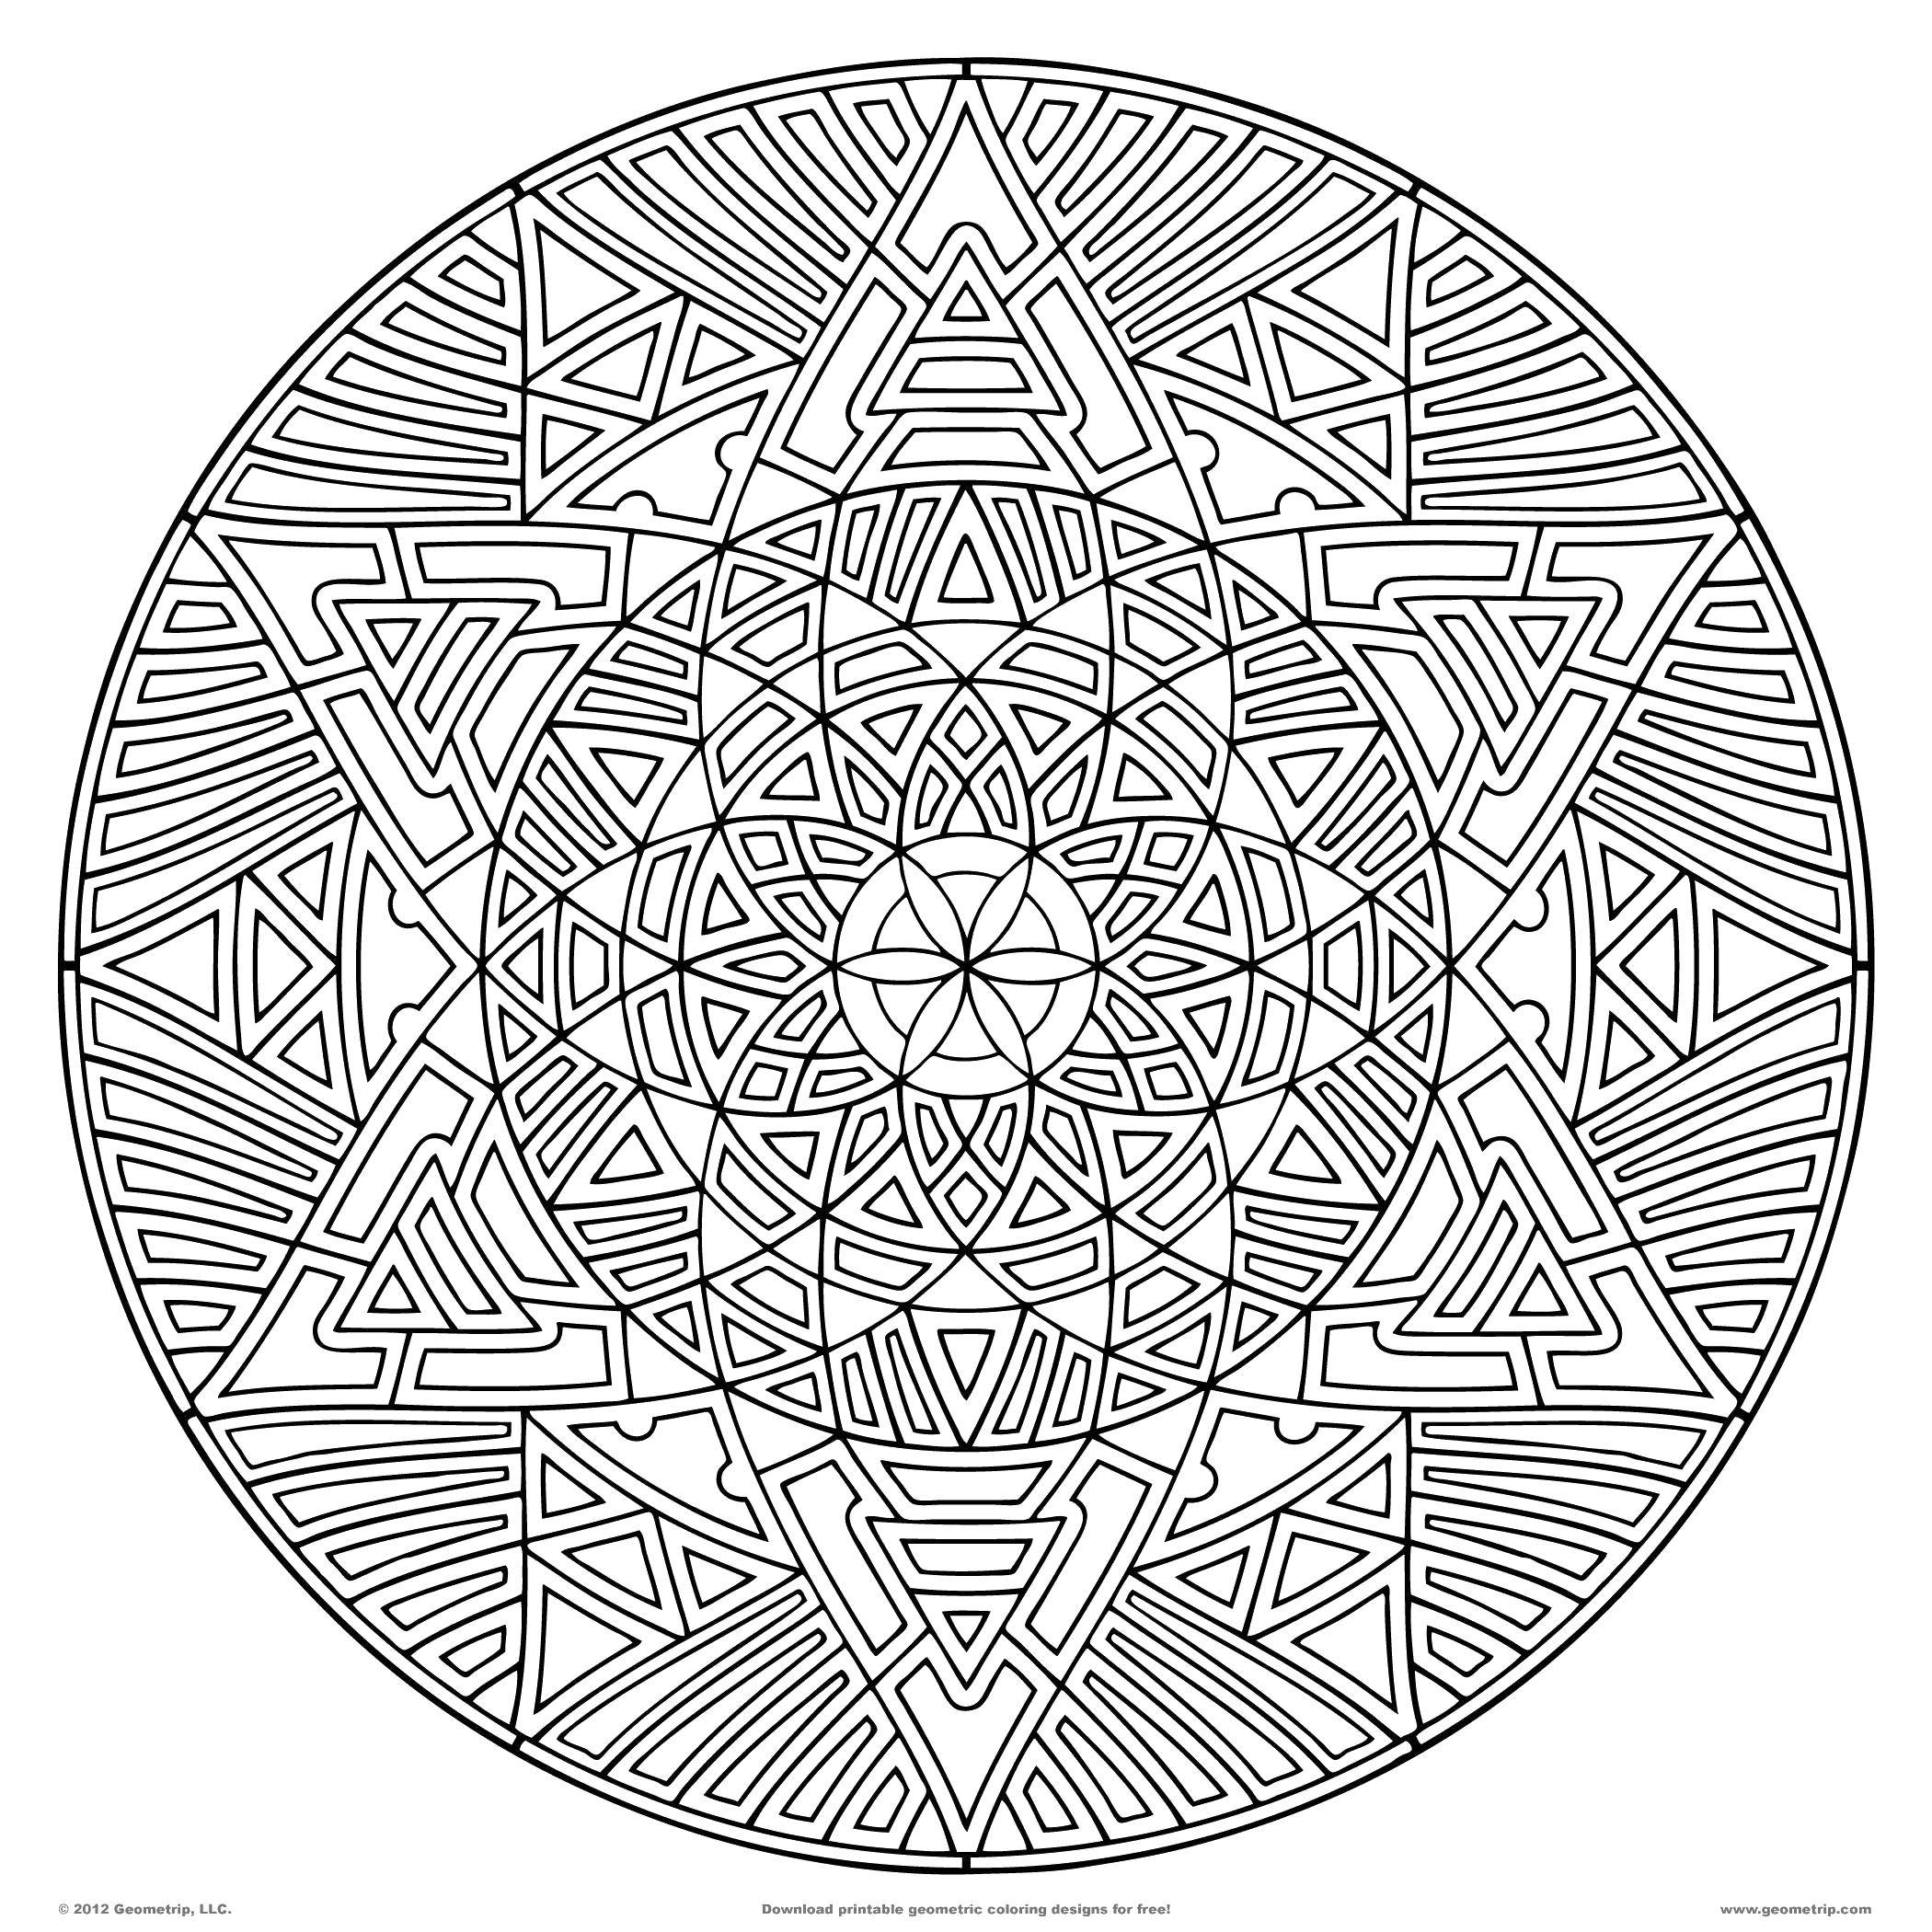 Coloring Small patterns in a circle. Category With patterns. Tags:  Patterns, geometric.